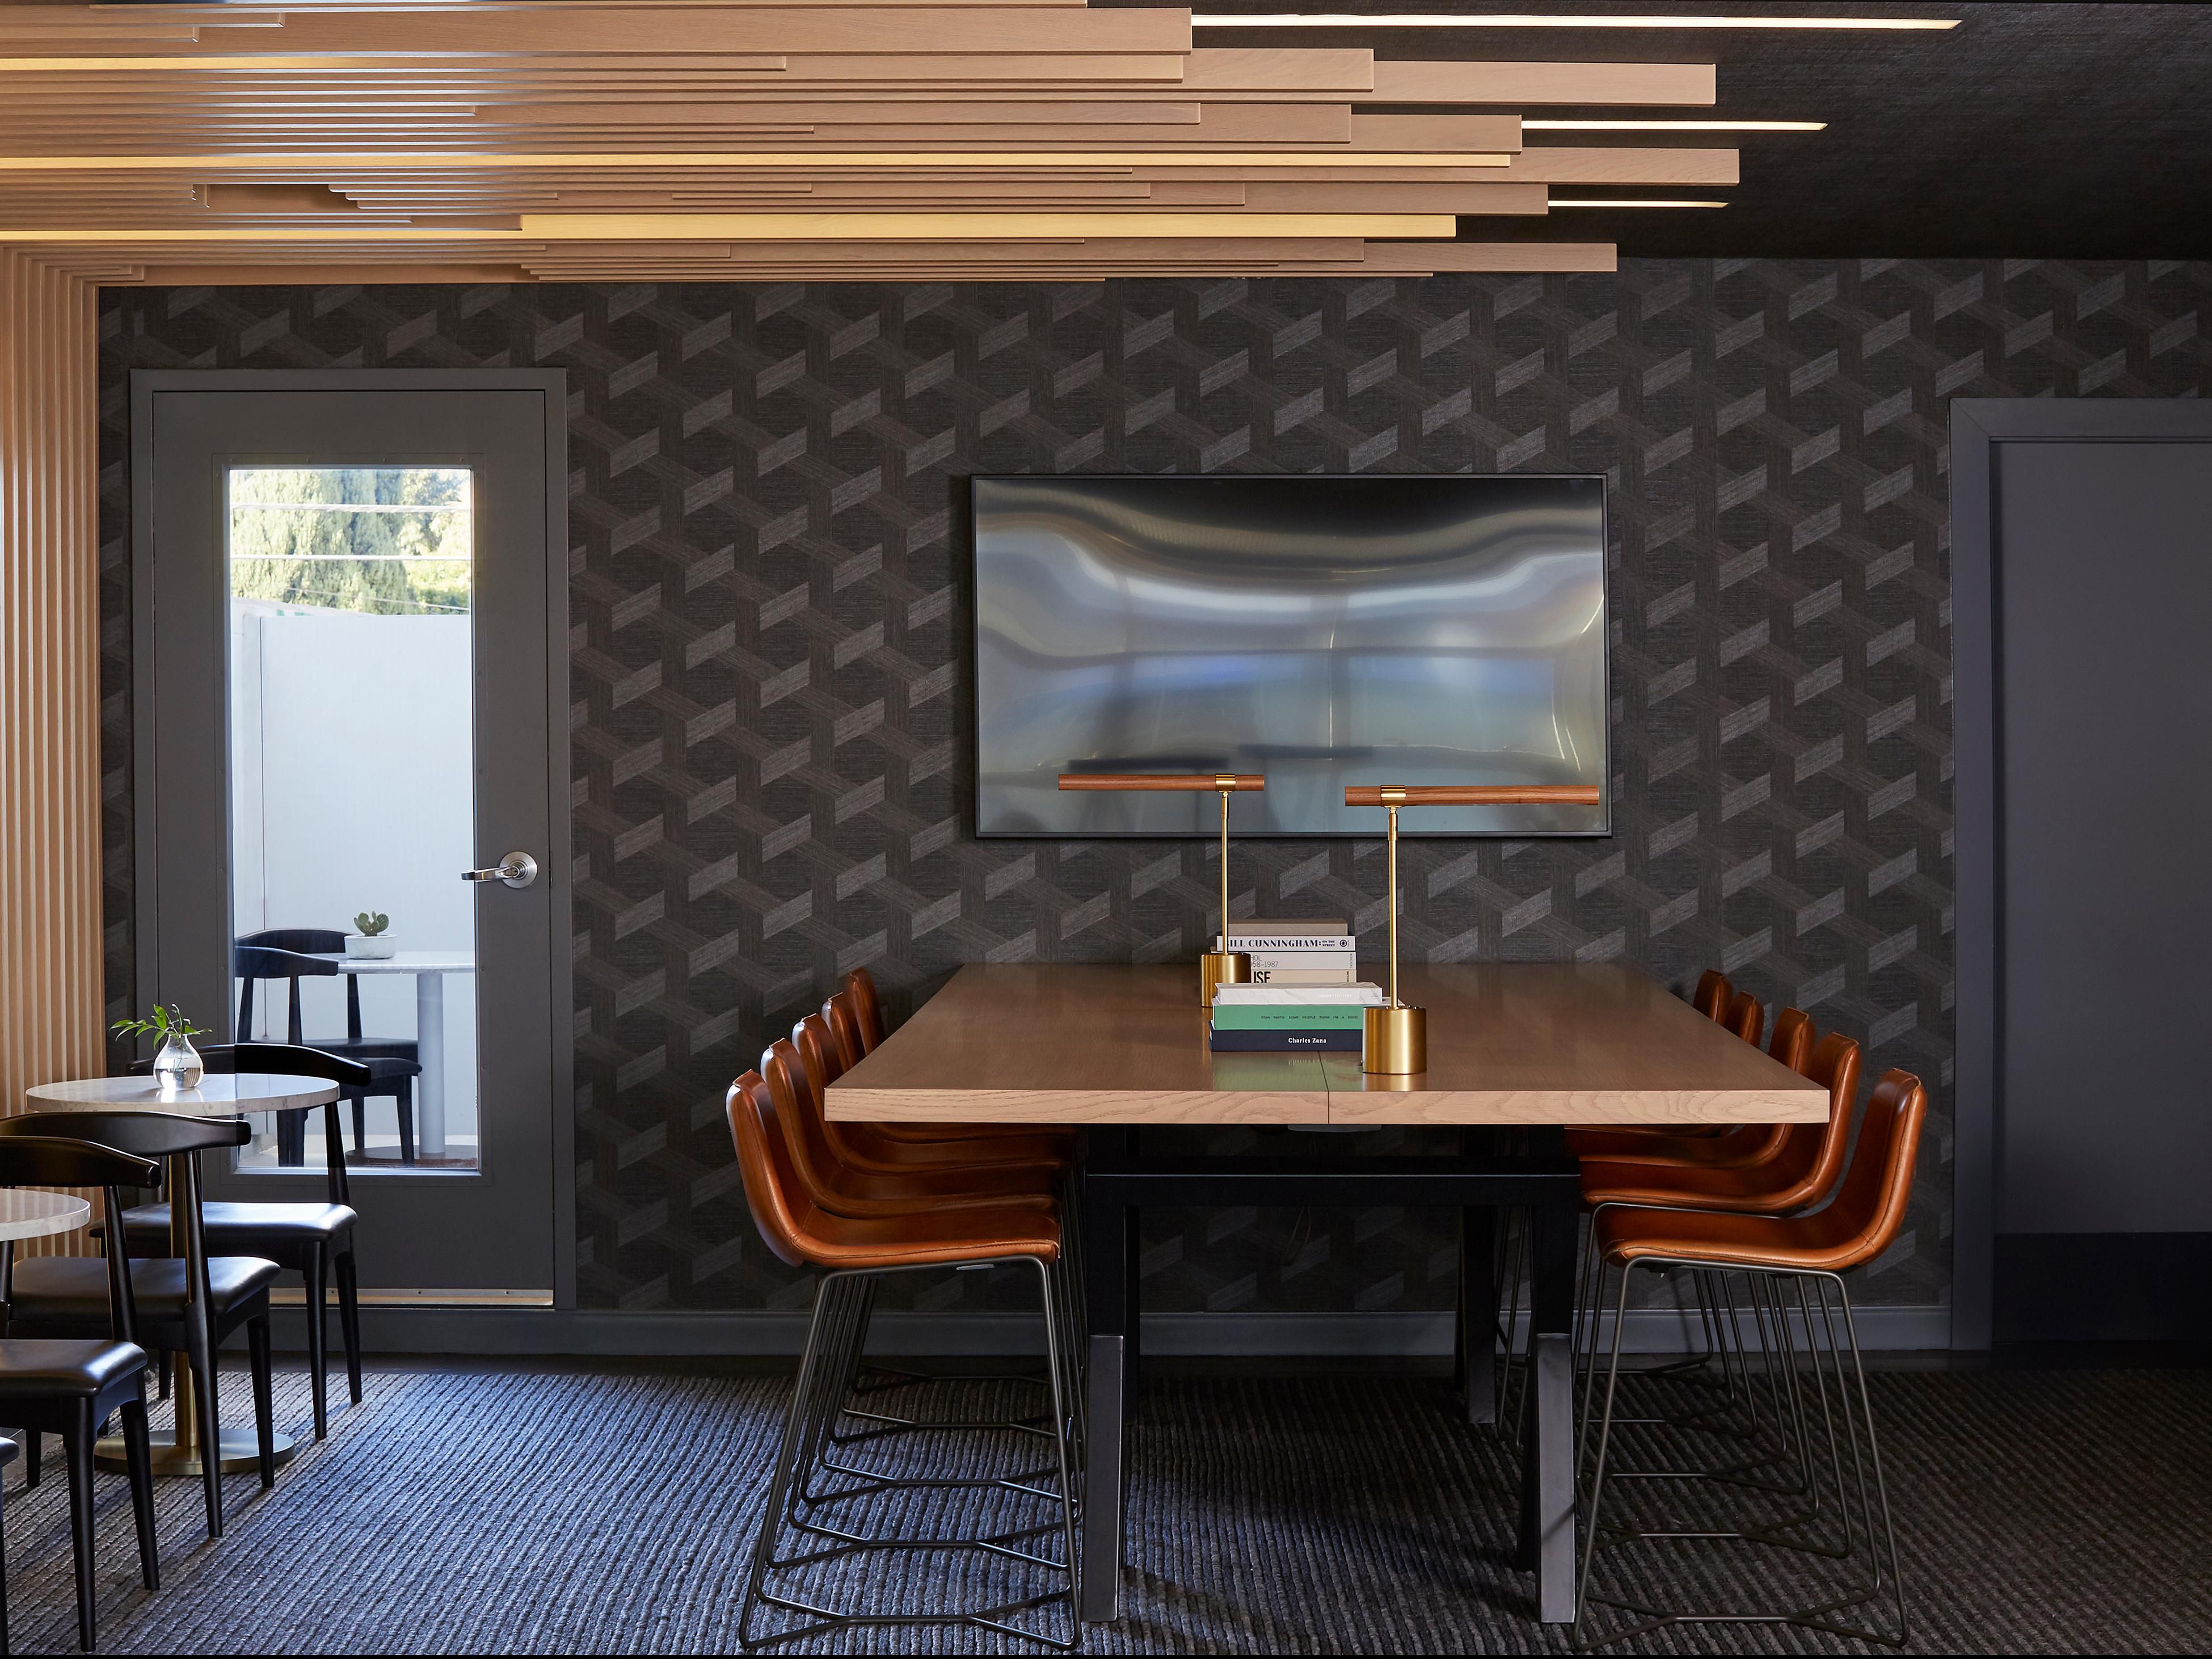 An upscale hotel meeting room with tables around the edges